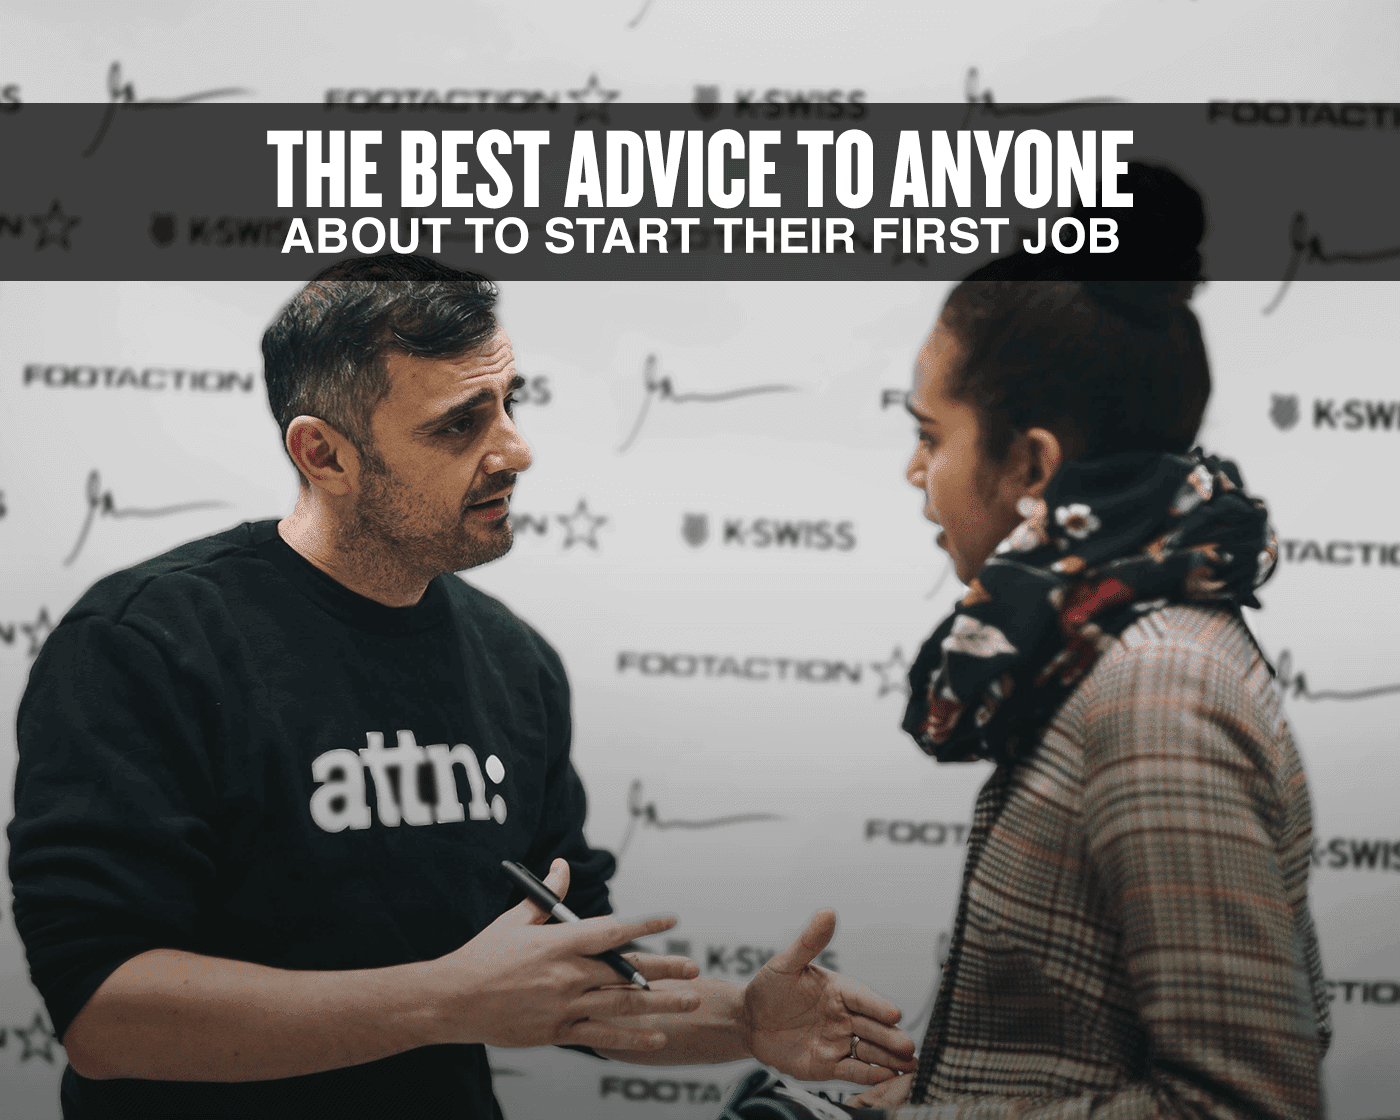 The Best Advice to Anyone About to Start Their First Job